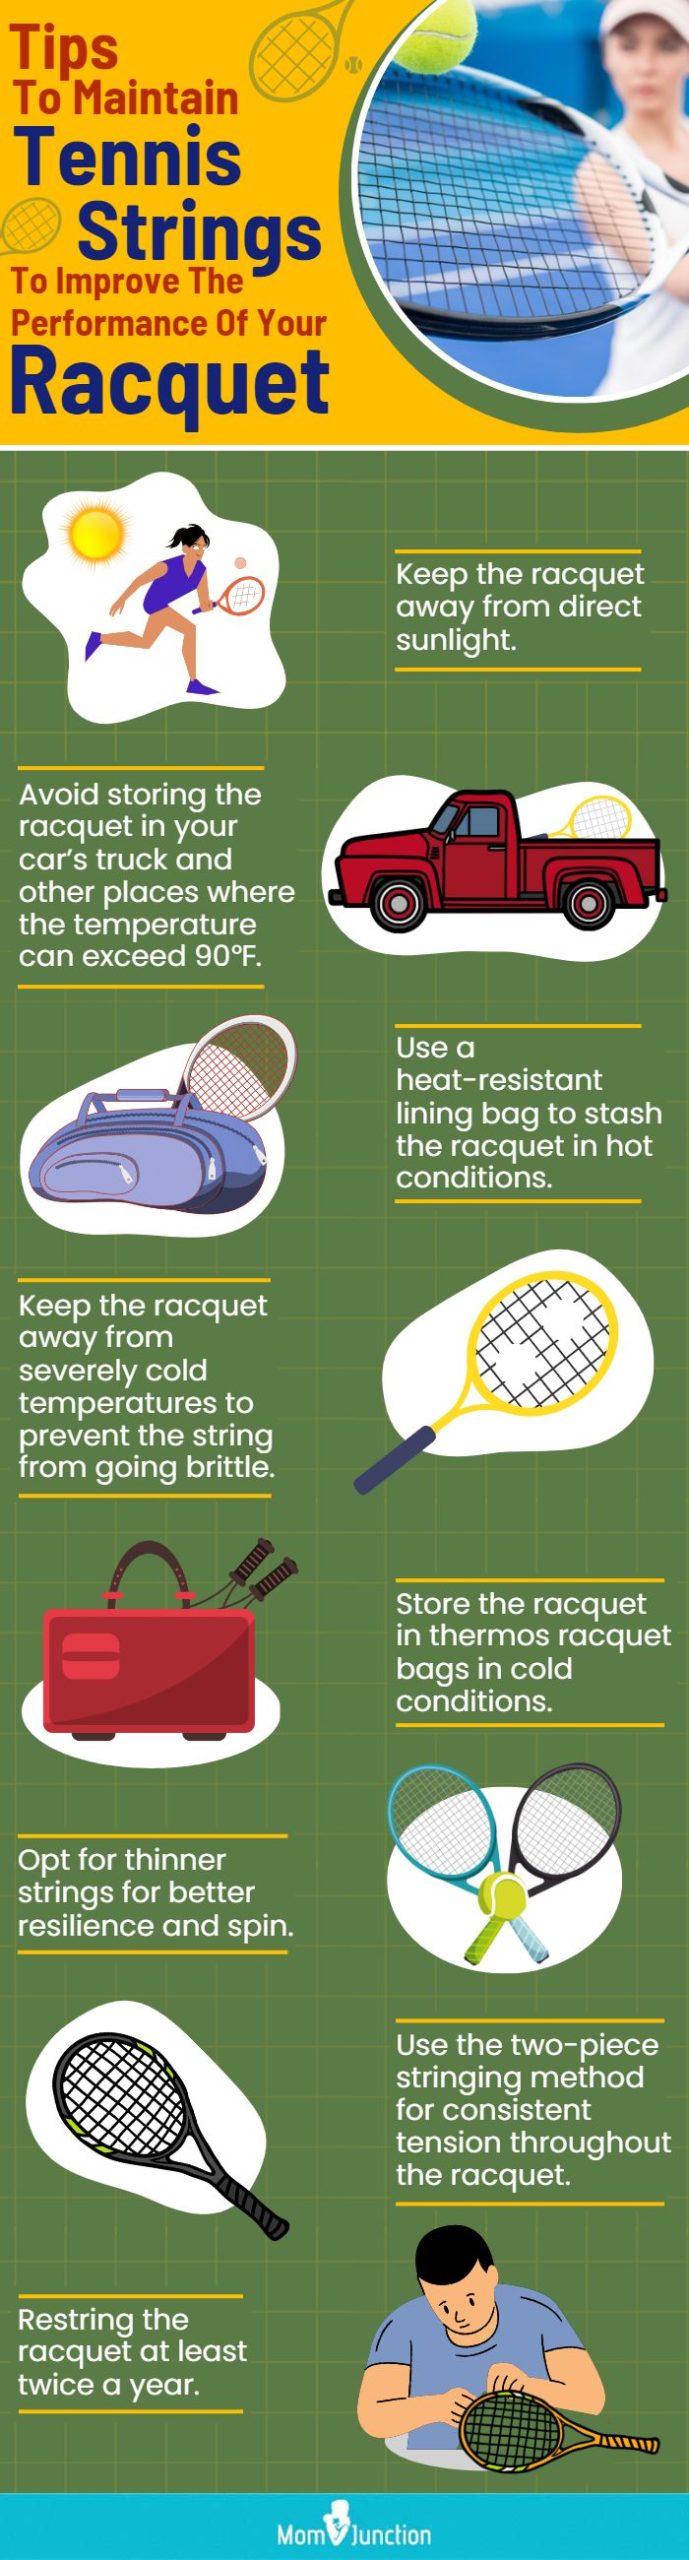 Tips To Maintain Tennis Strings To Improve The Performance Of Your Racquet